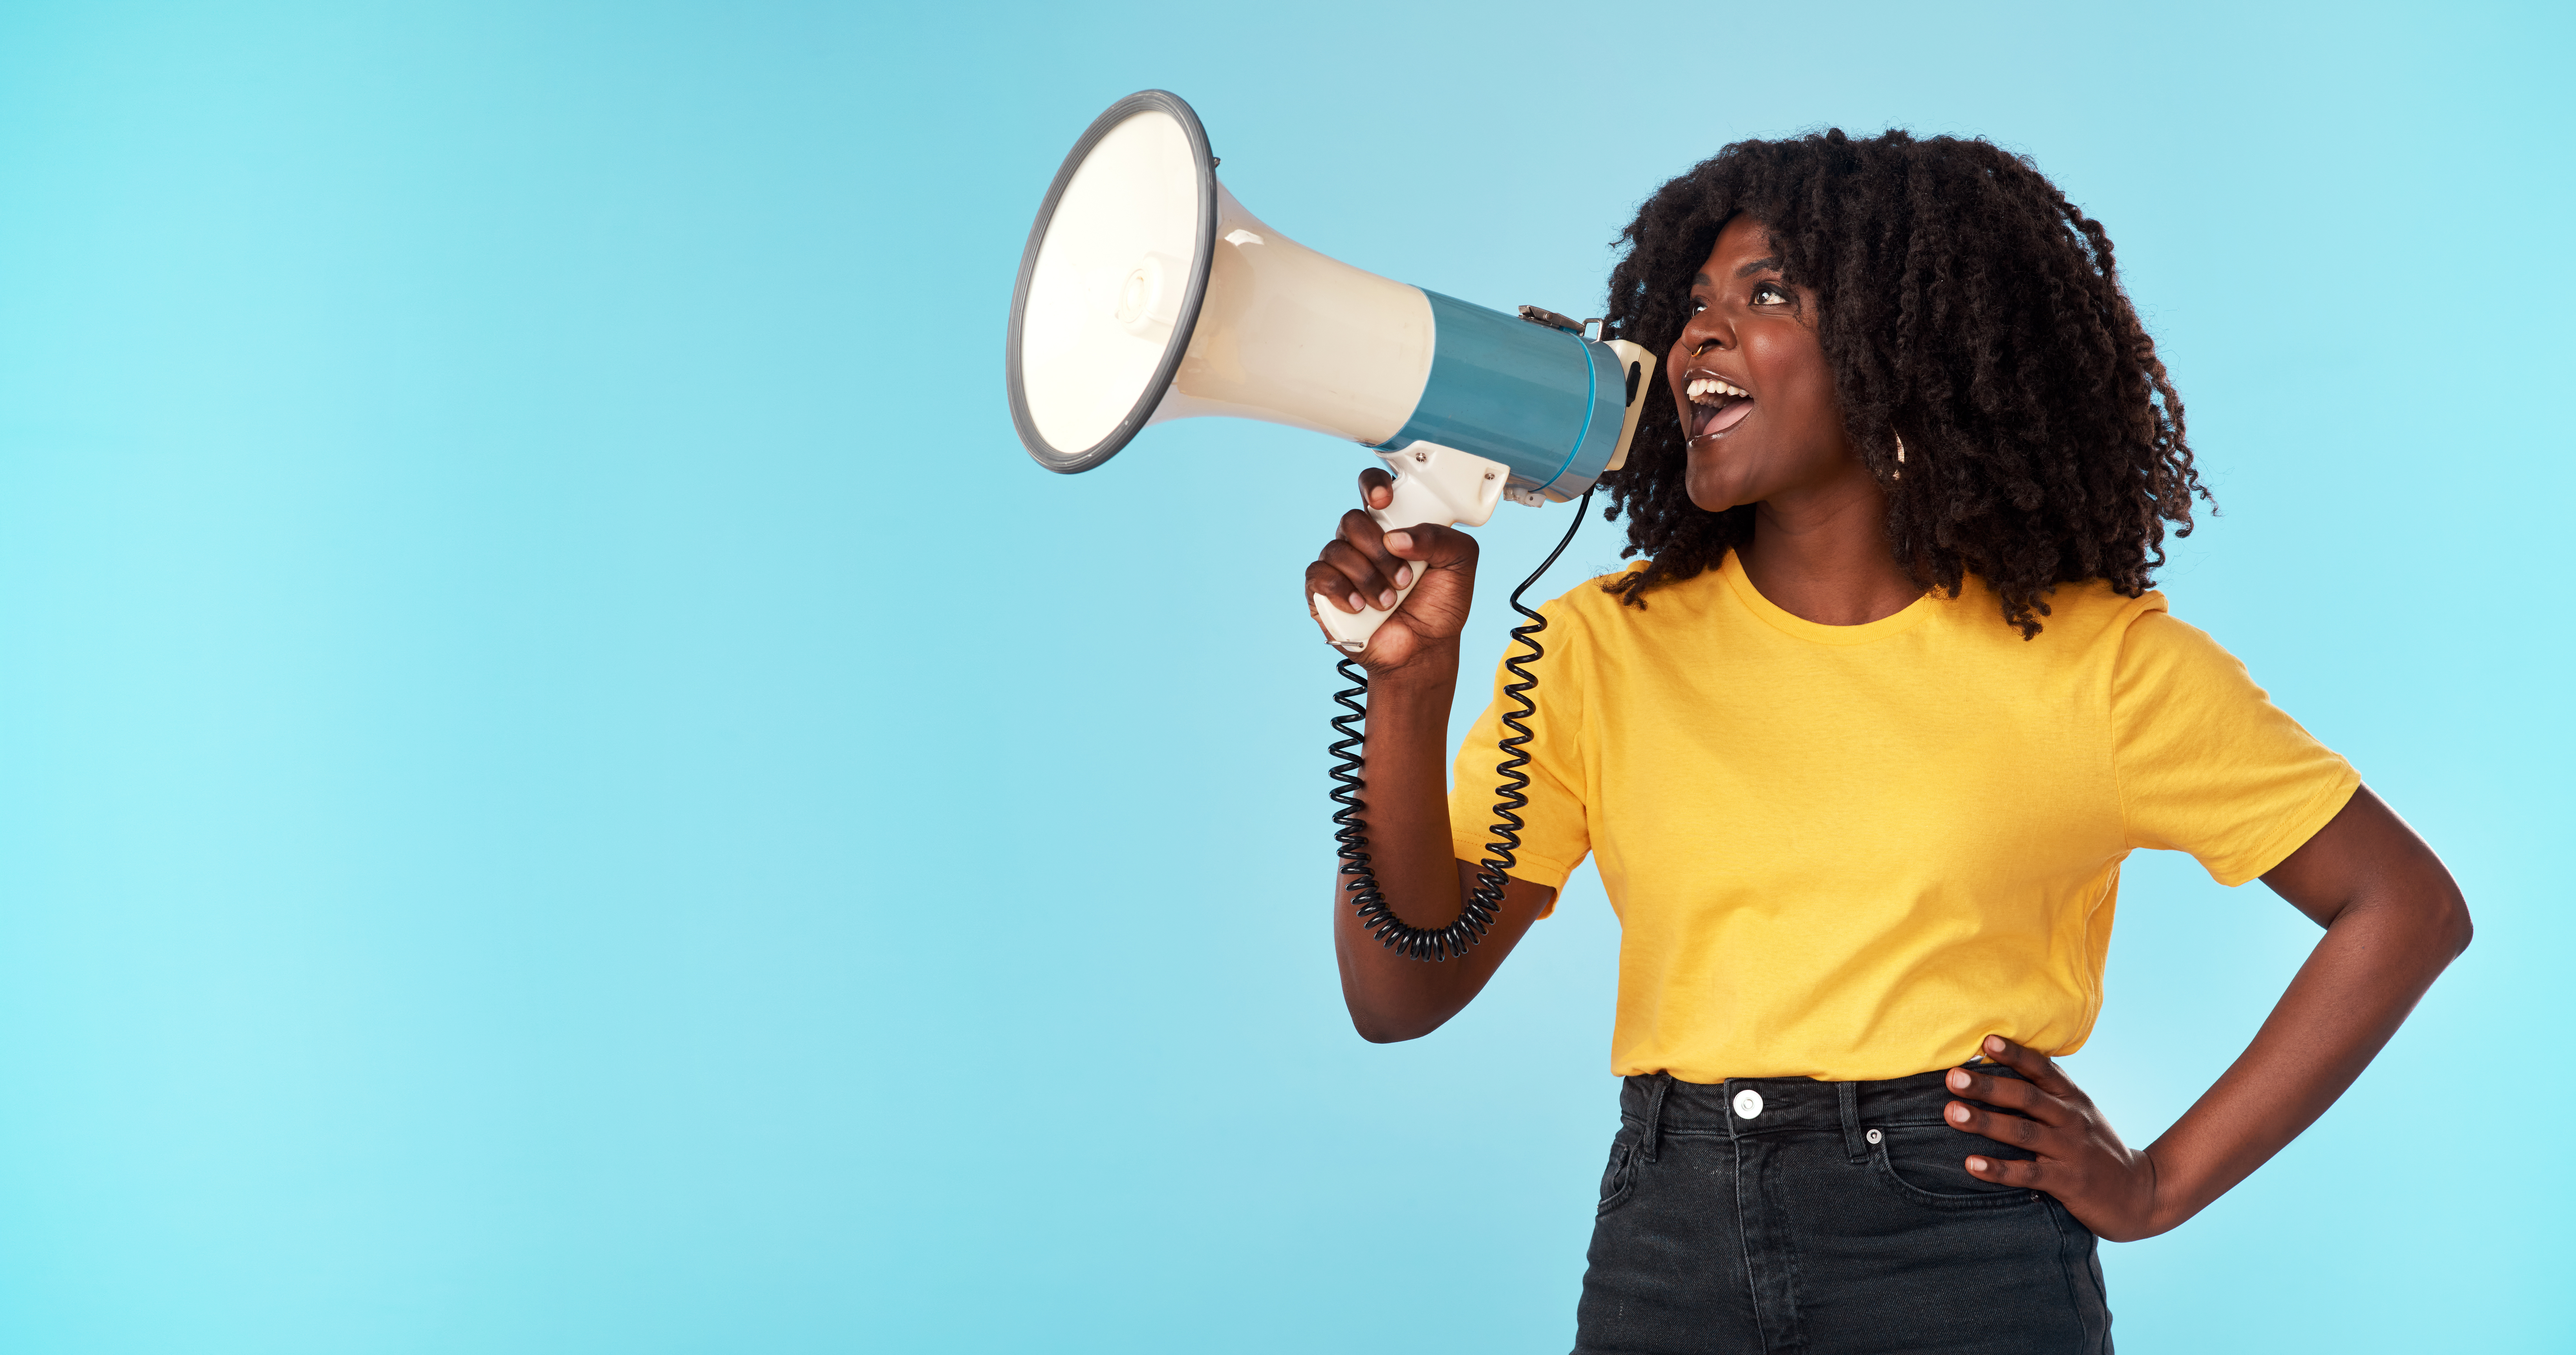 A woman talks into a megaphone in front of a light blue background.